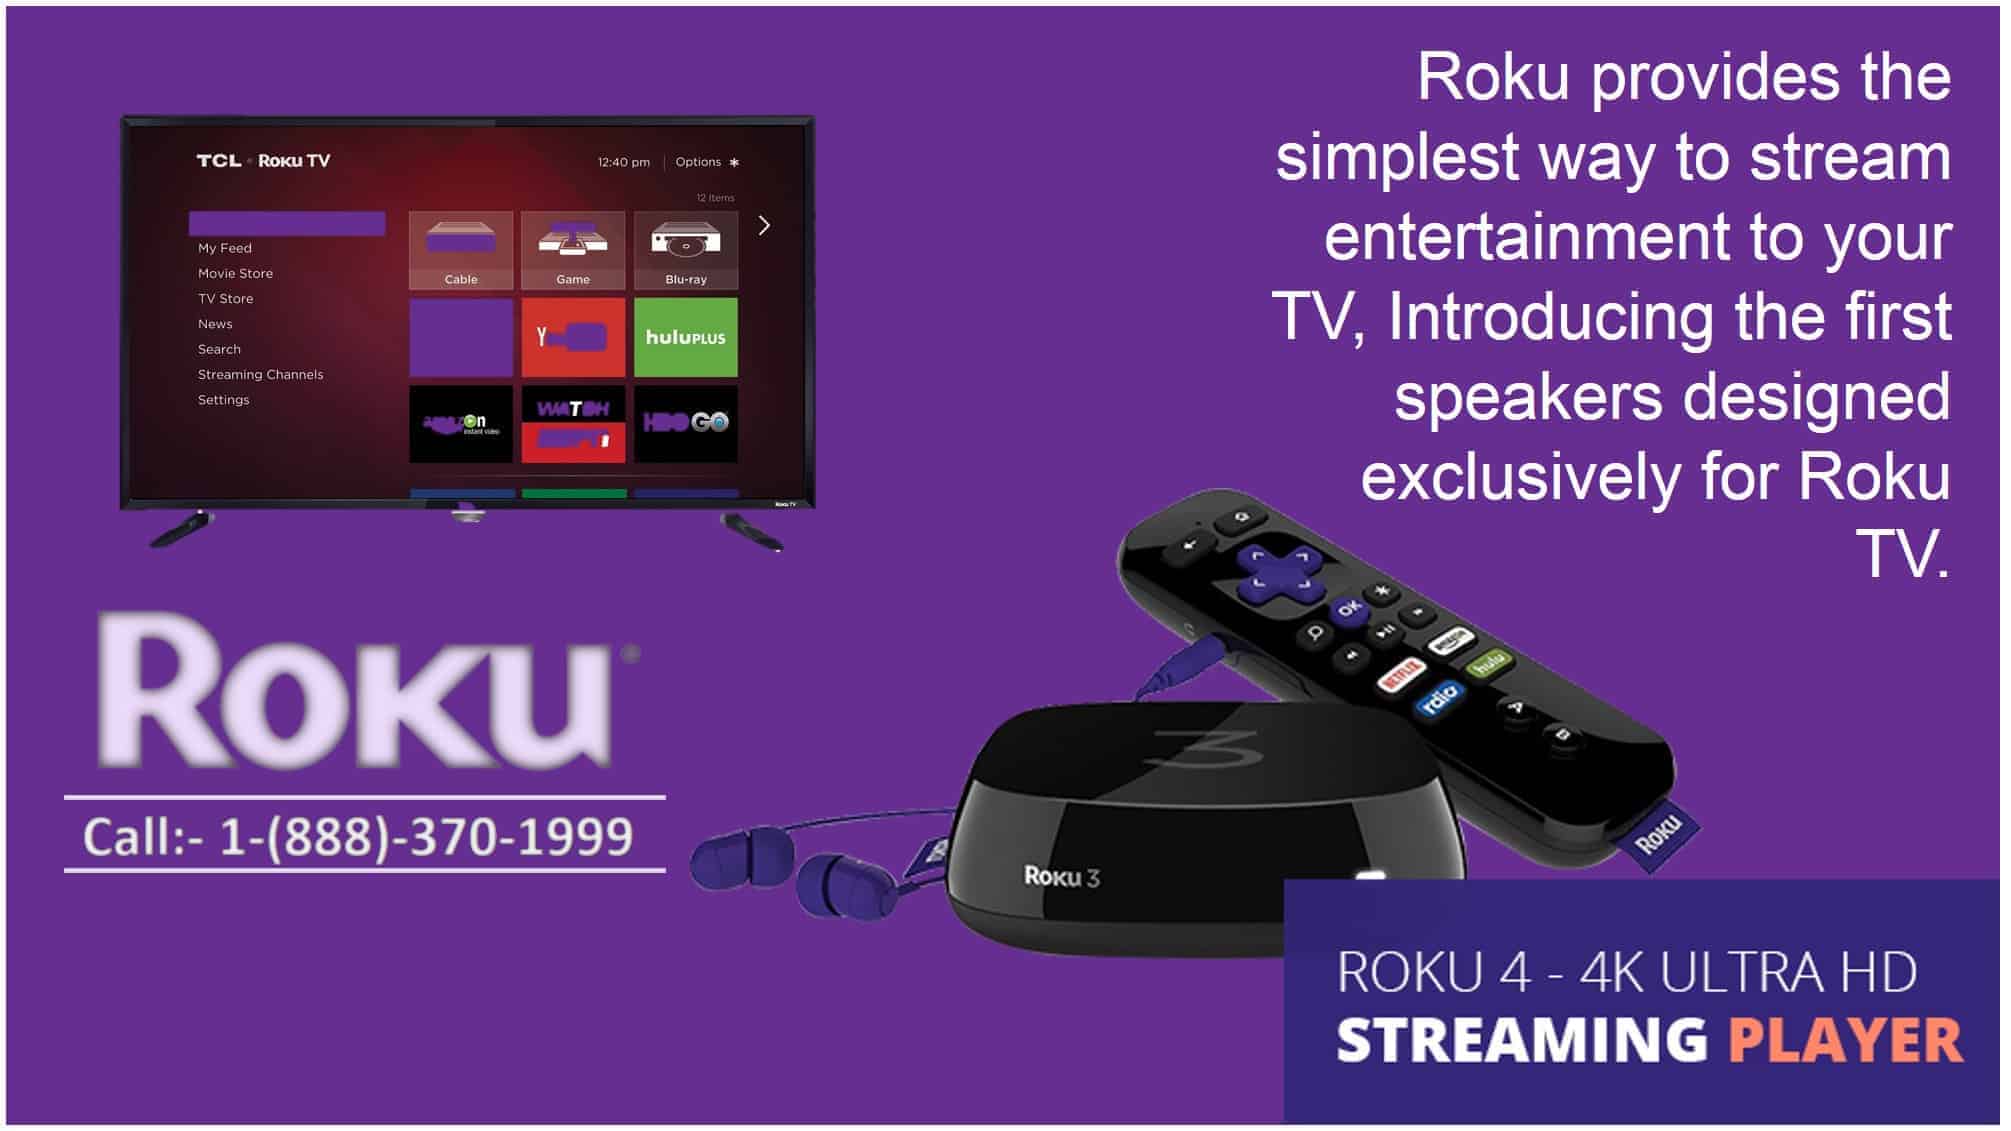 roku customer care phone number Archives - Instant Online Customer Service & Support | +1-888 ...